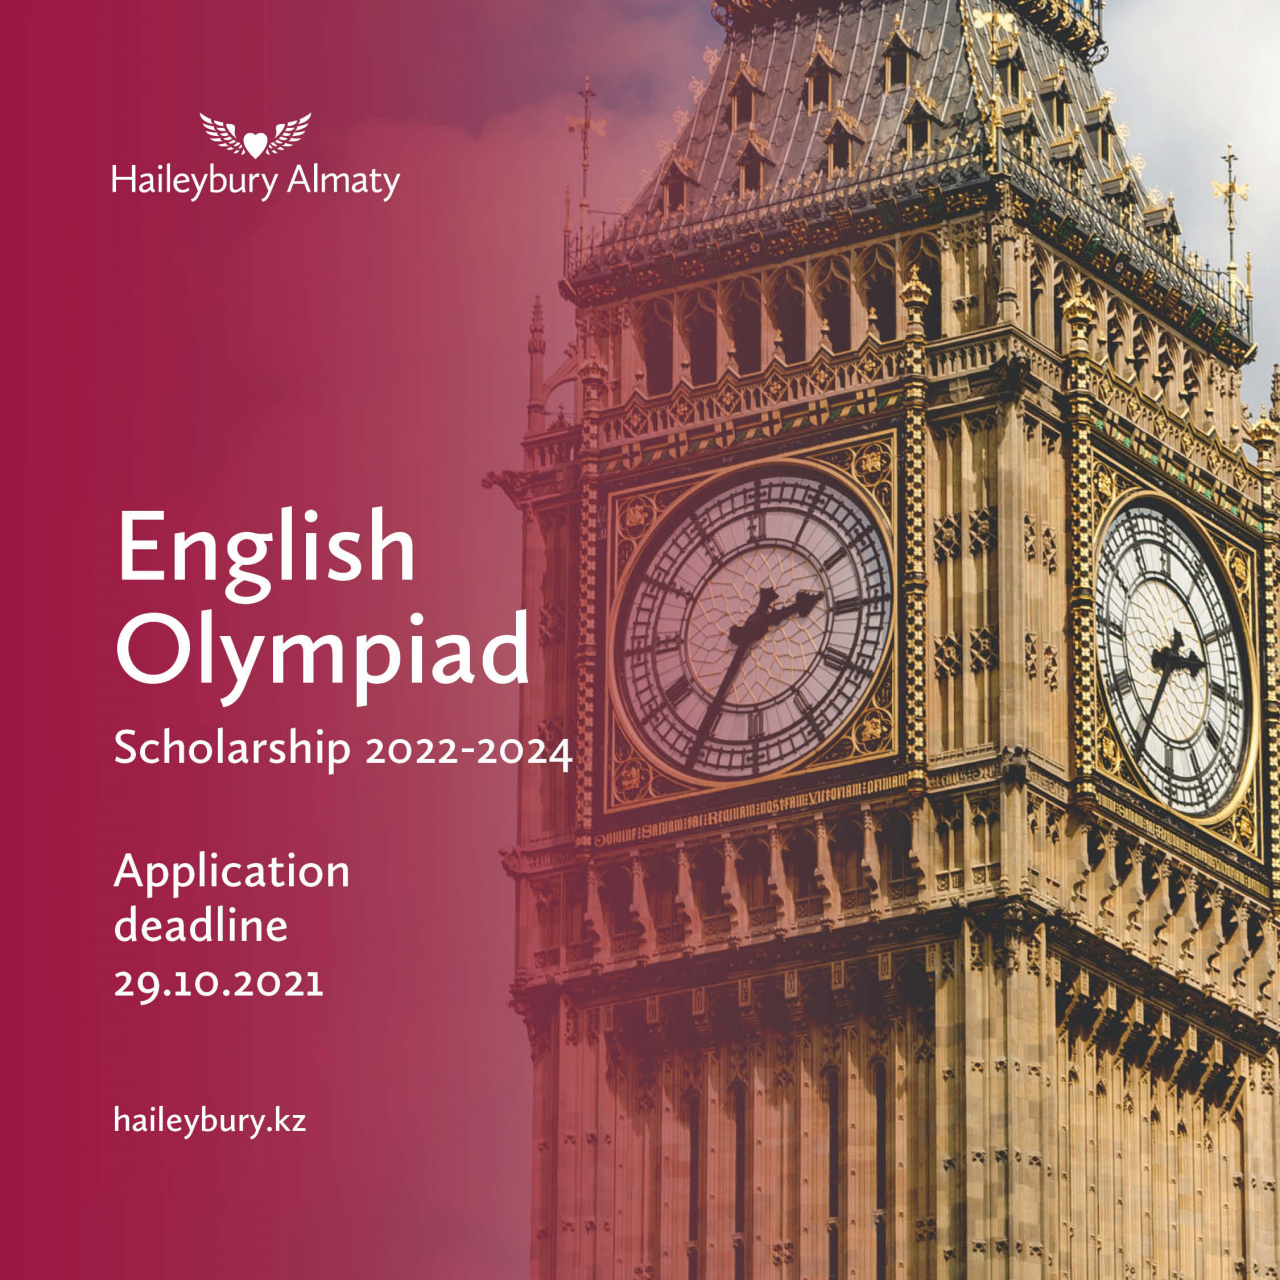 Haileybury Almaty invites all high school students to take part in the 2021 English Olympiad.